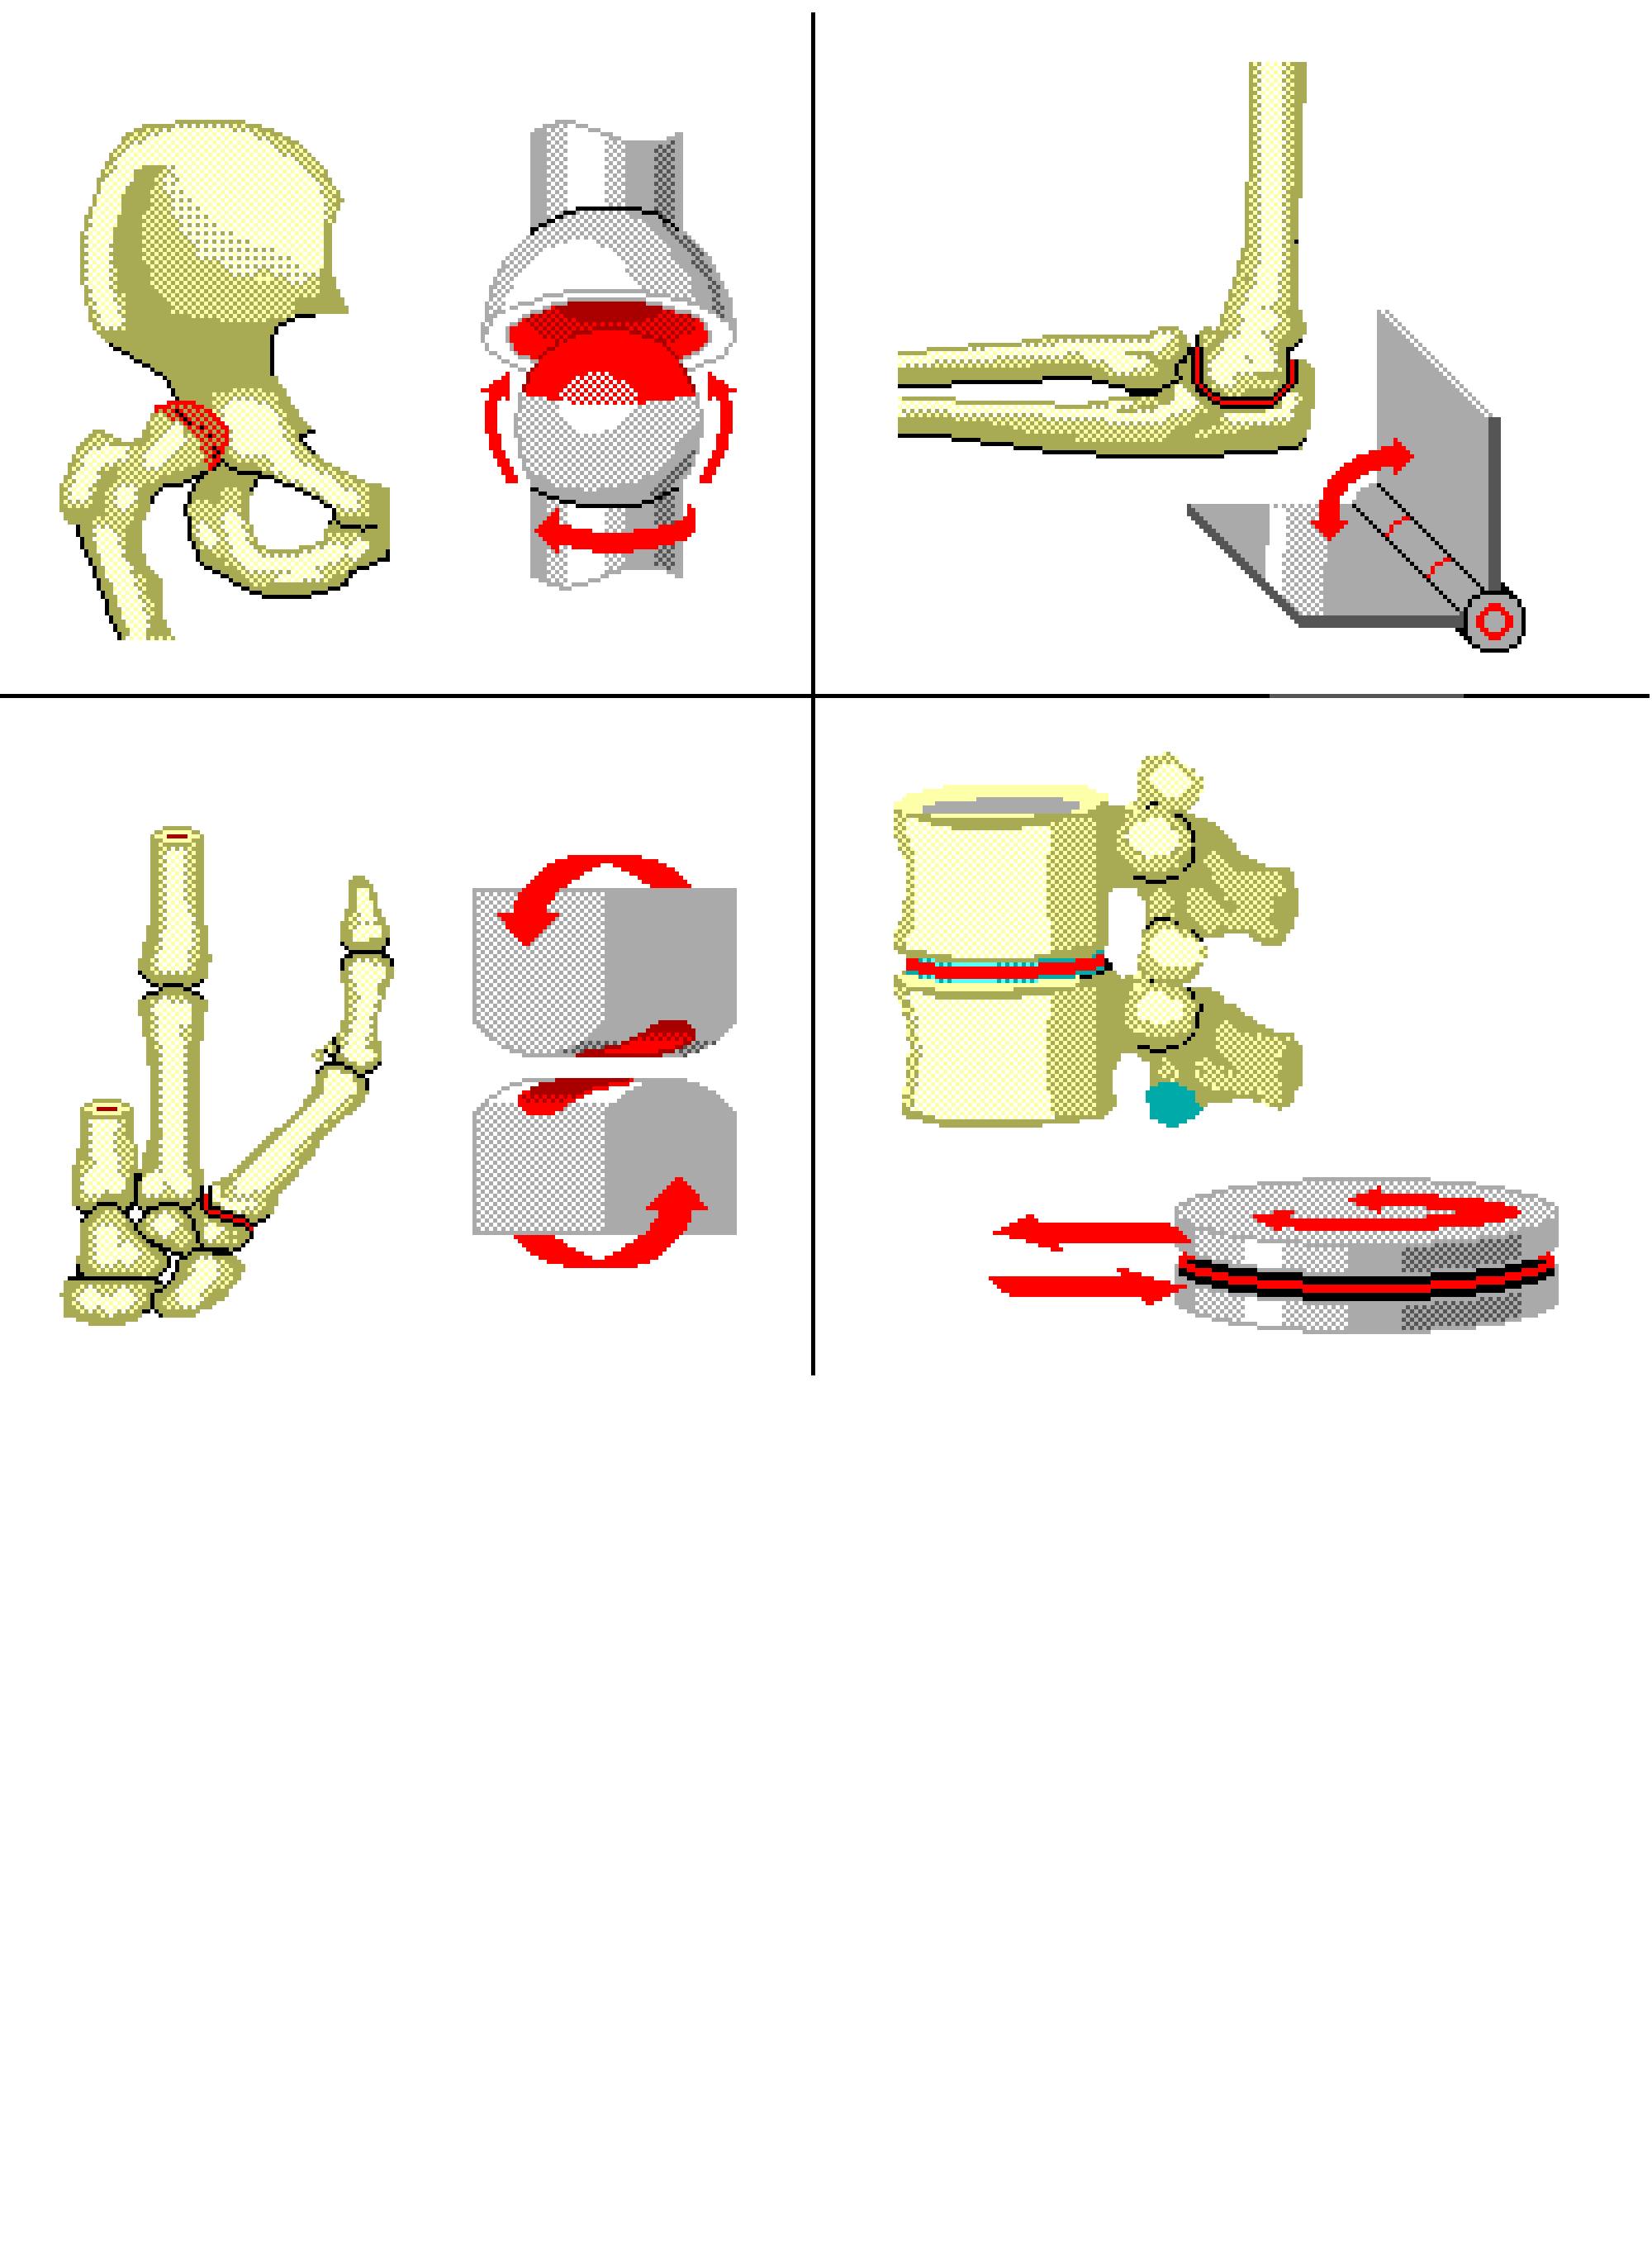 freely movable joints